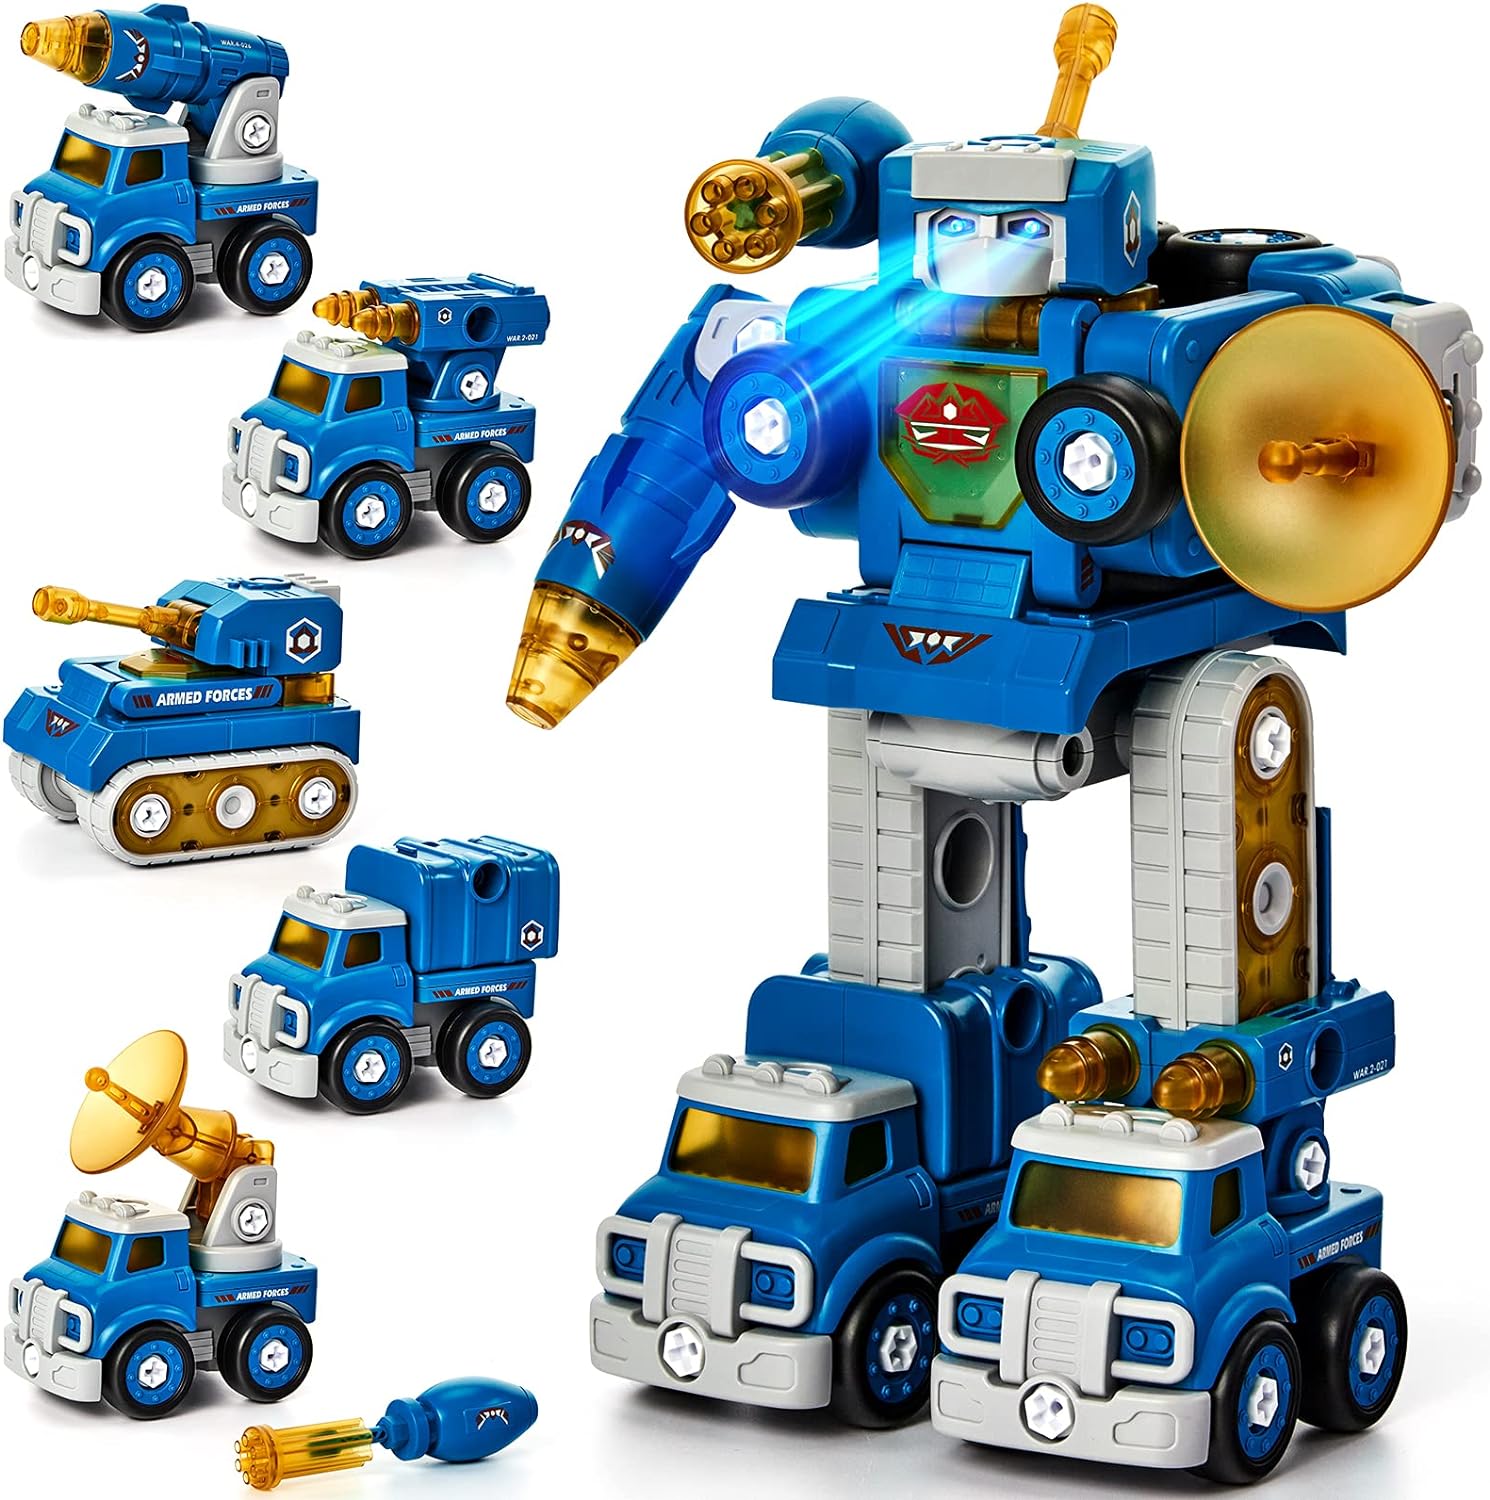 Toys for 4 5 Year Old Boy Thickened Drop-Resistant 5 in 1 Vehicles -STEM Educational Transform into Robot Christmas Birthday Gifts for Kids Girls Boys Toys Age 5 6 7 8 - Toys for 4 5 6 Year Old Boys